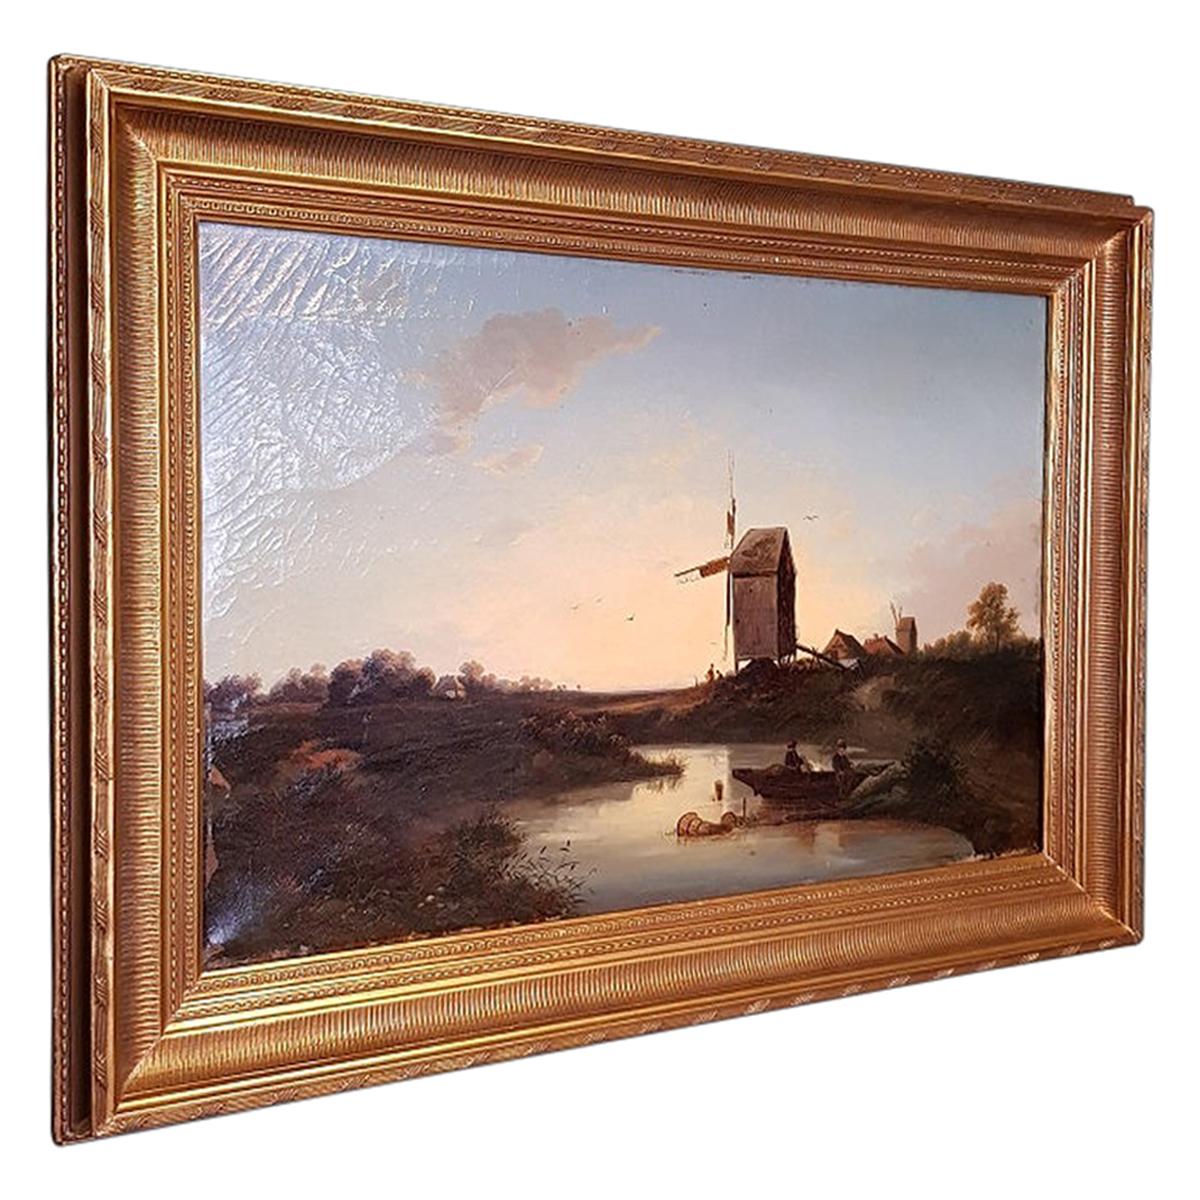 Antique Dutch School oil painting on canvas and attributed to Johannes Hilverdink, depicting a polder landscape of fishermen at a mill in a new gilt frame, it has some paint loss in the left corner and in a reasonable condition around crackle.